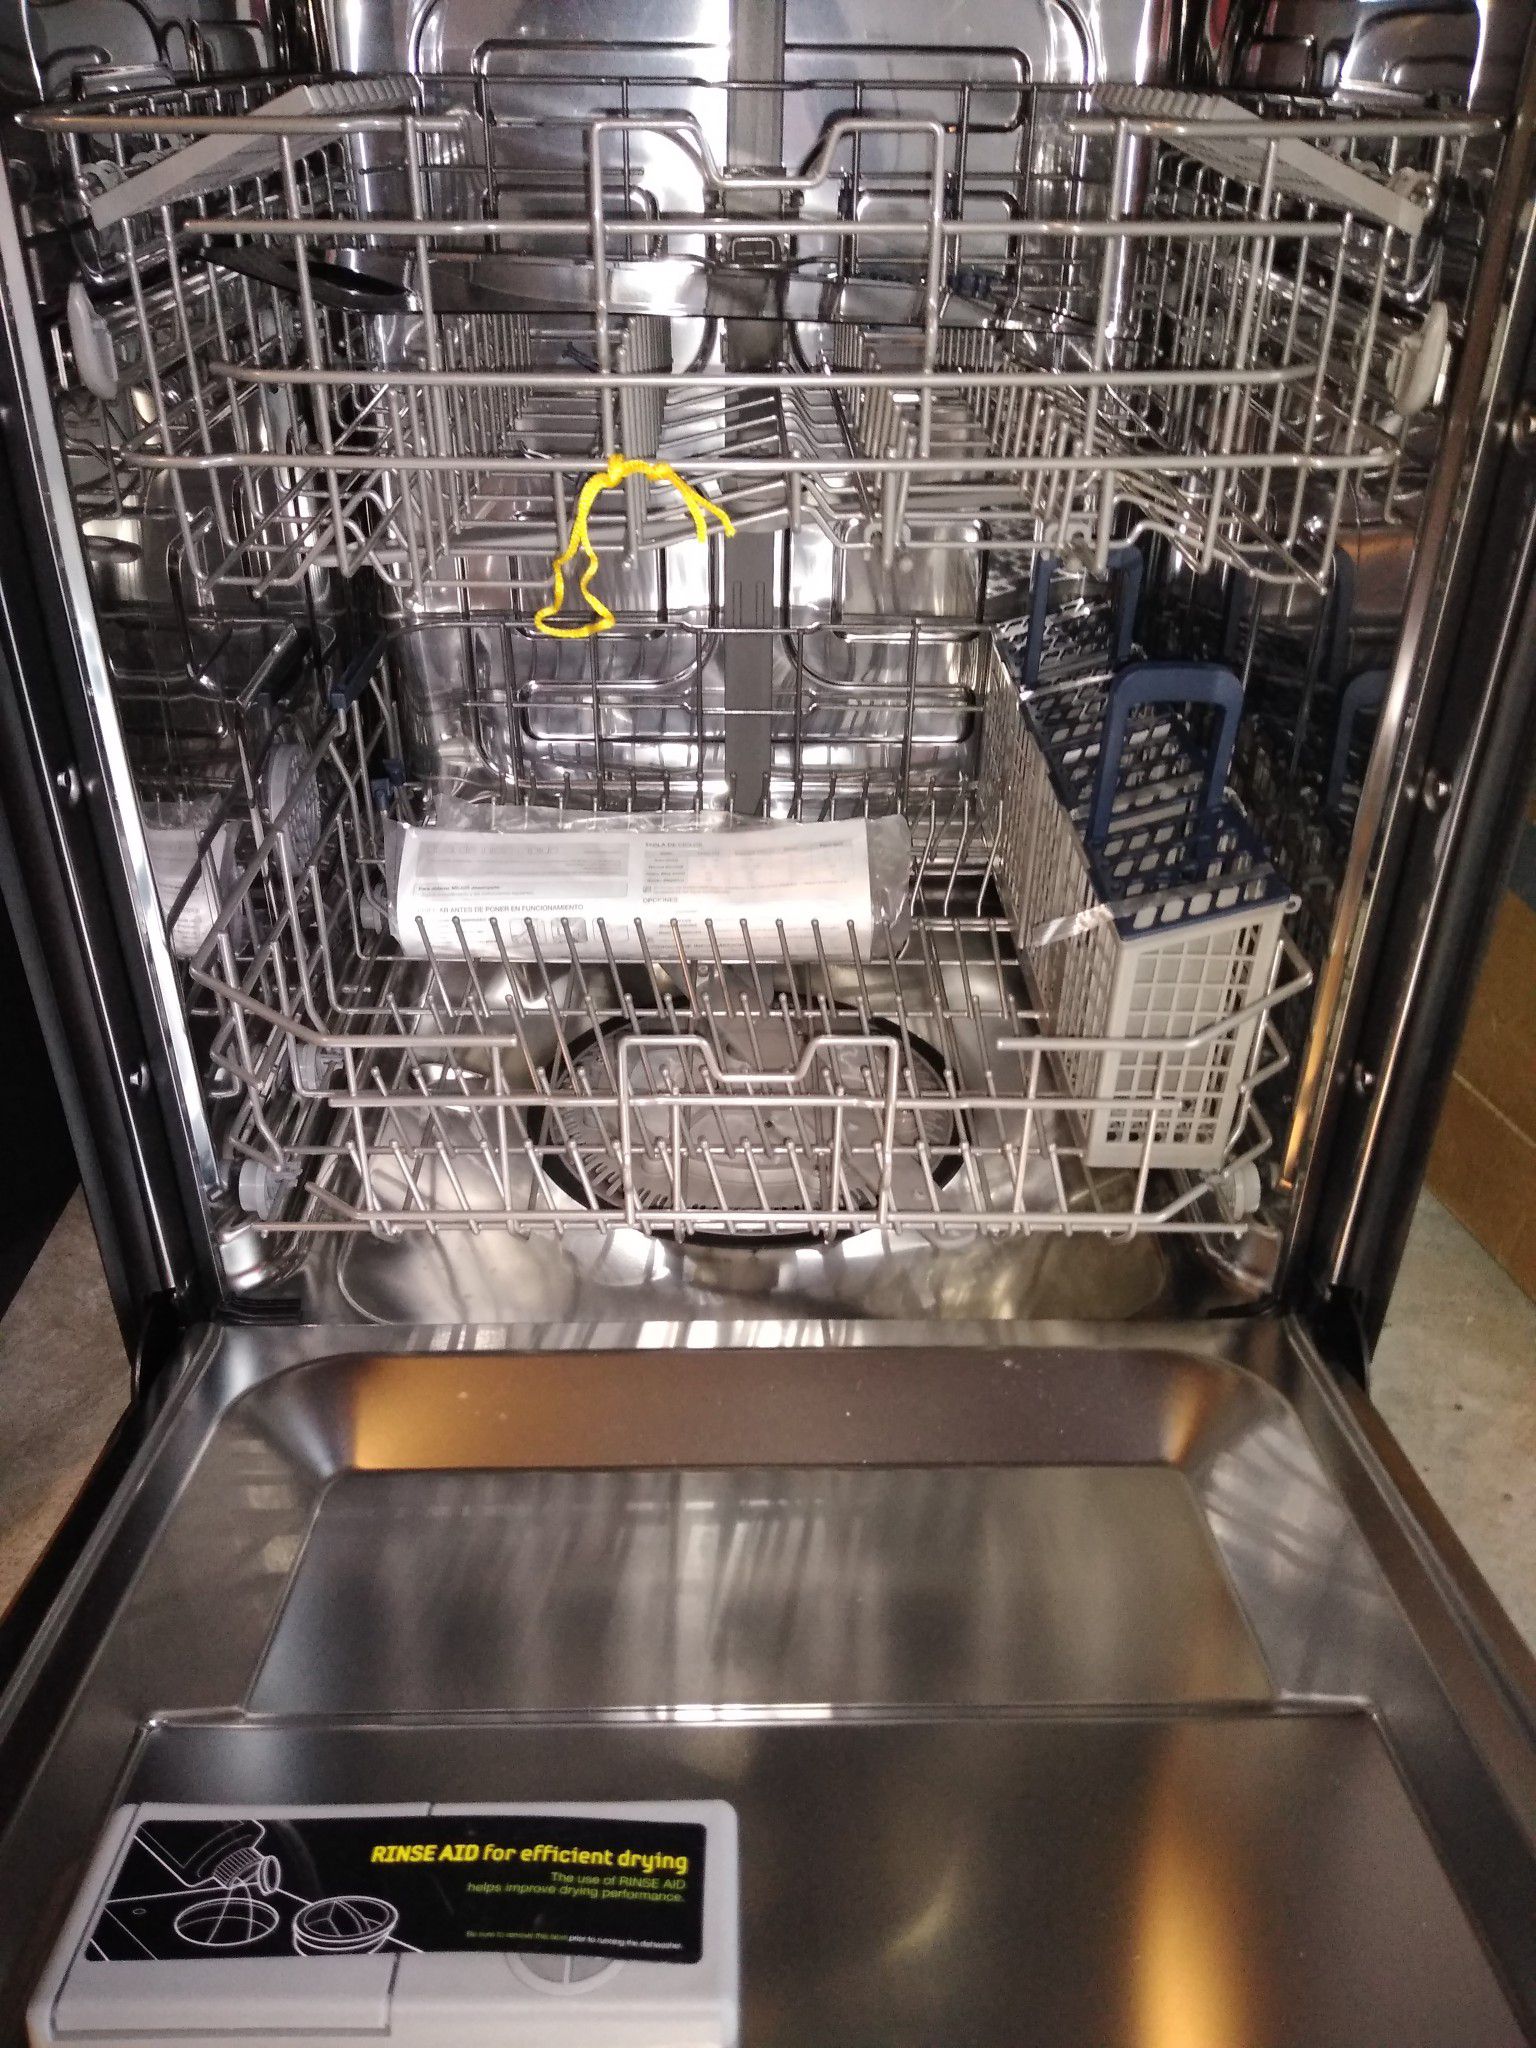 Samsung brand new never used stainless steel dishwasher